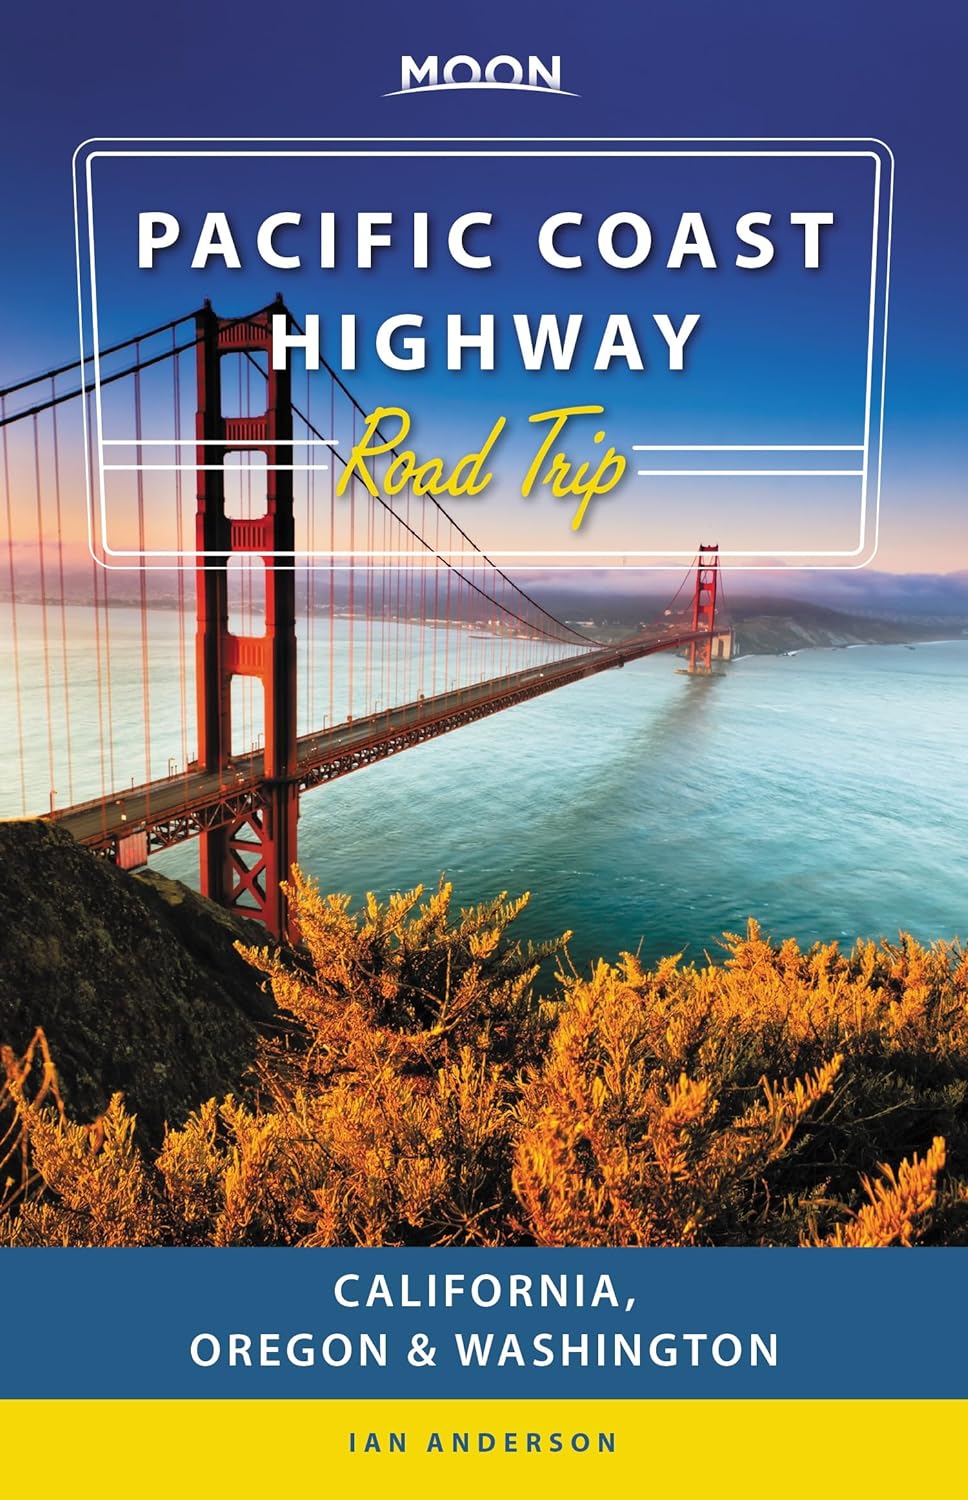 Moon-PCH_road-trip-guide-cover-new-edition.jpg